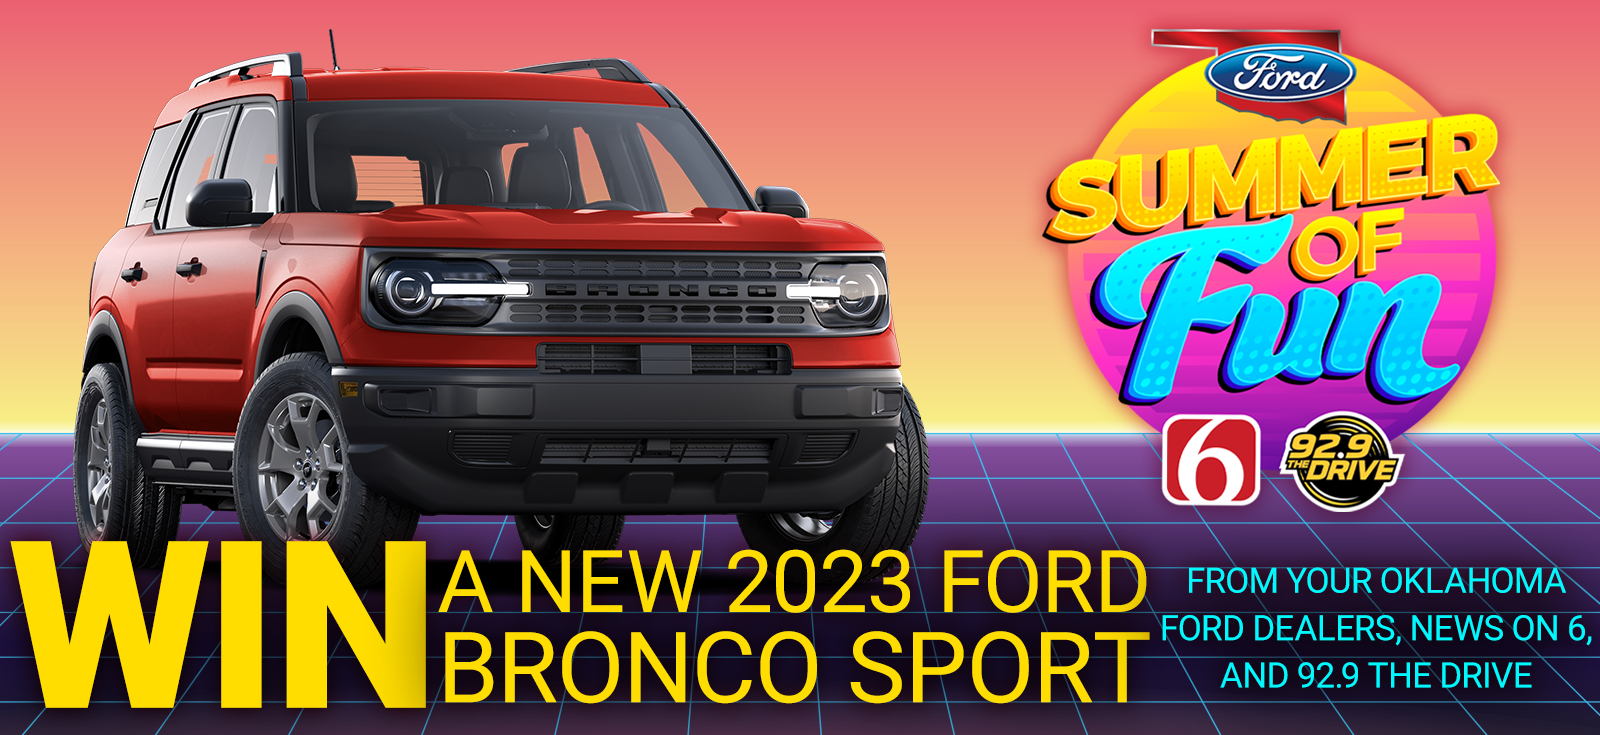 Win a NEW 2023 Ford Bronco Sport from The River and News On 6